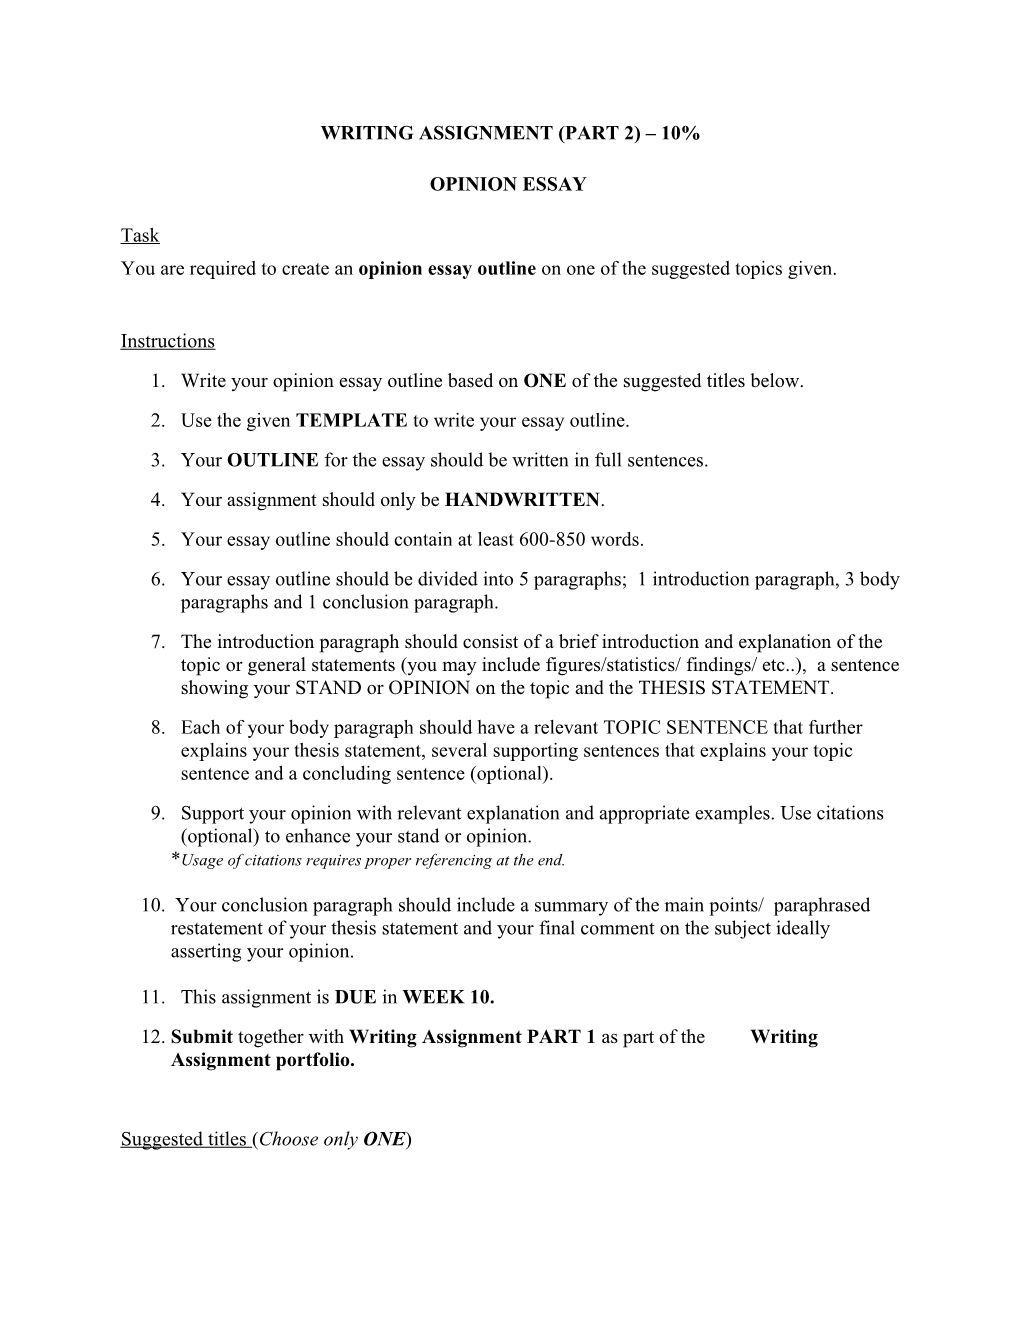 Writing Assignment 2 Outline (Opinion Essay)